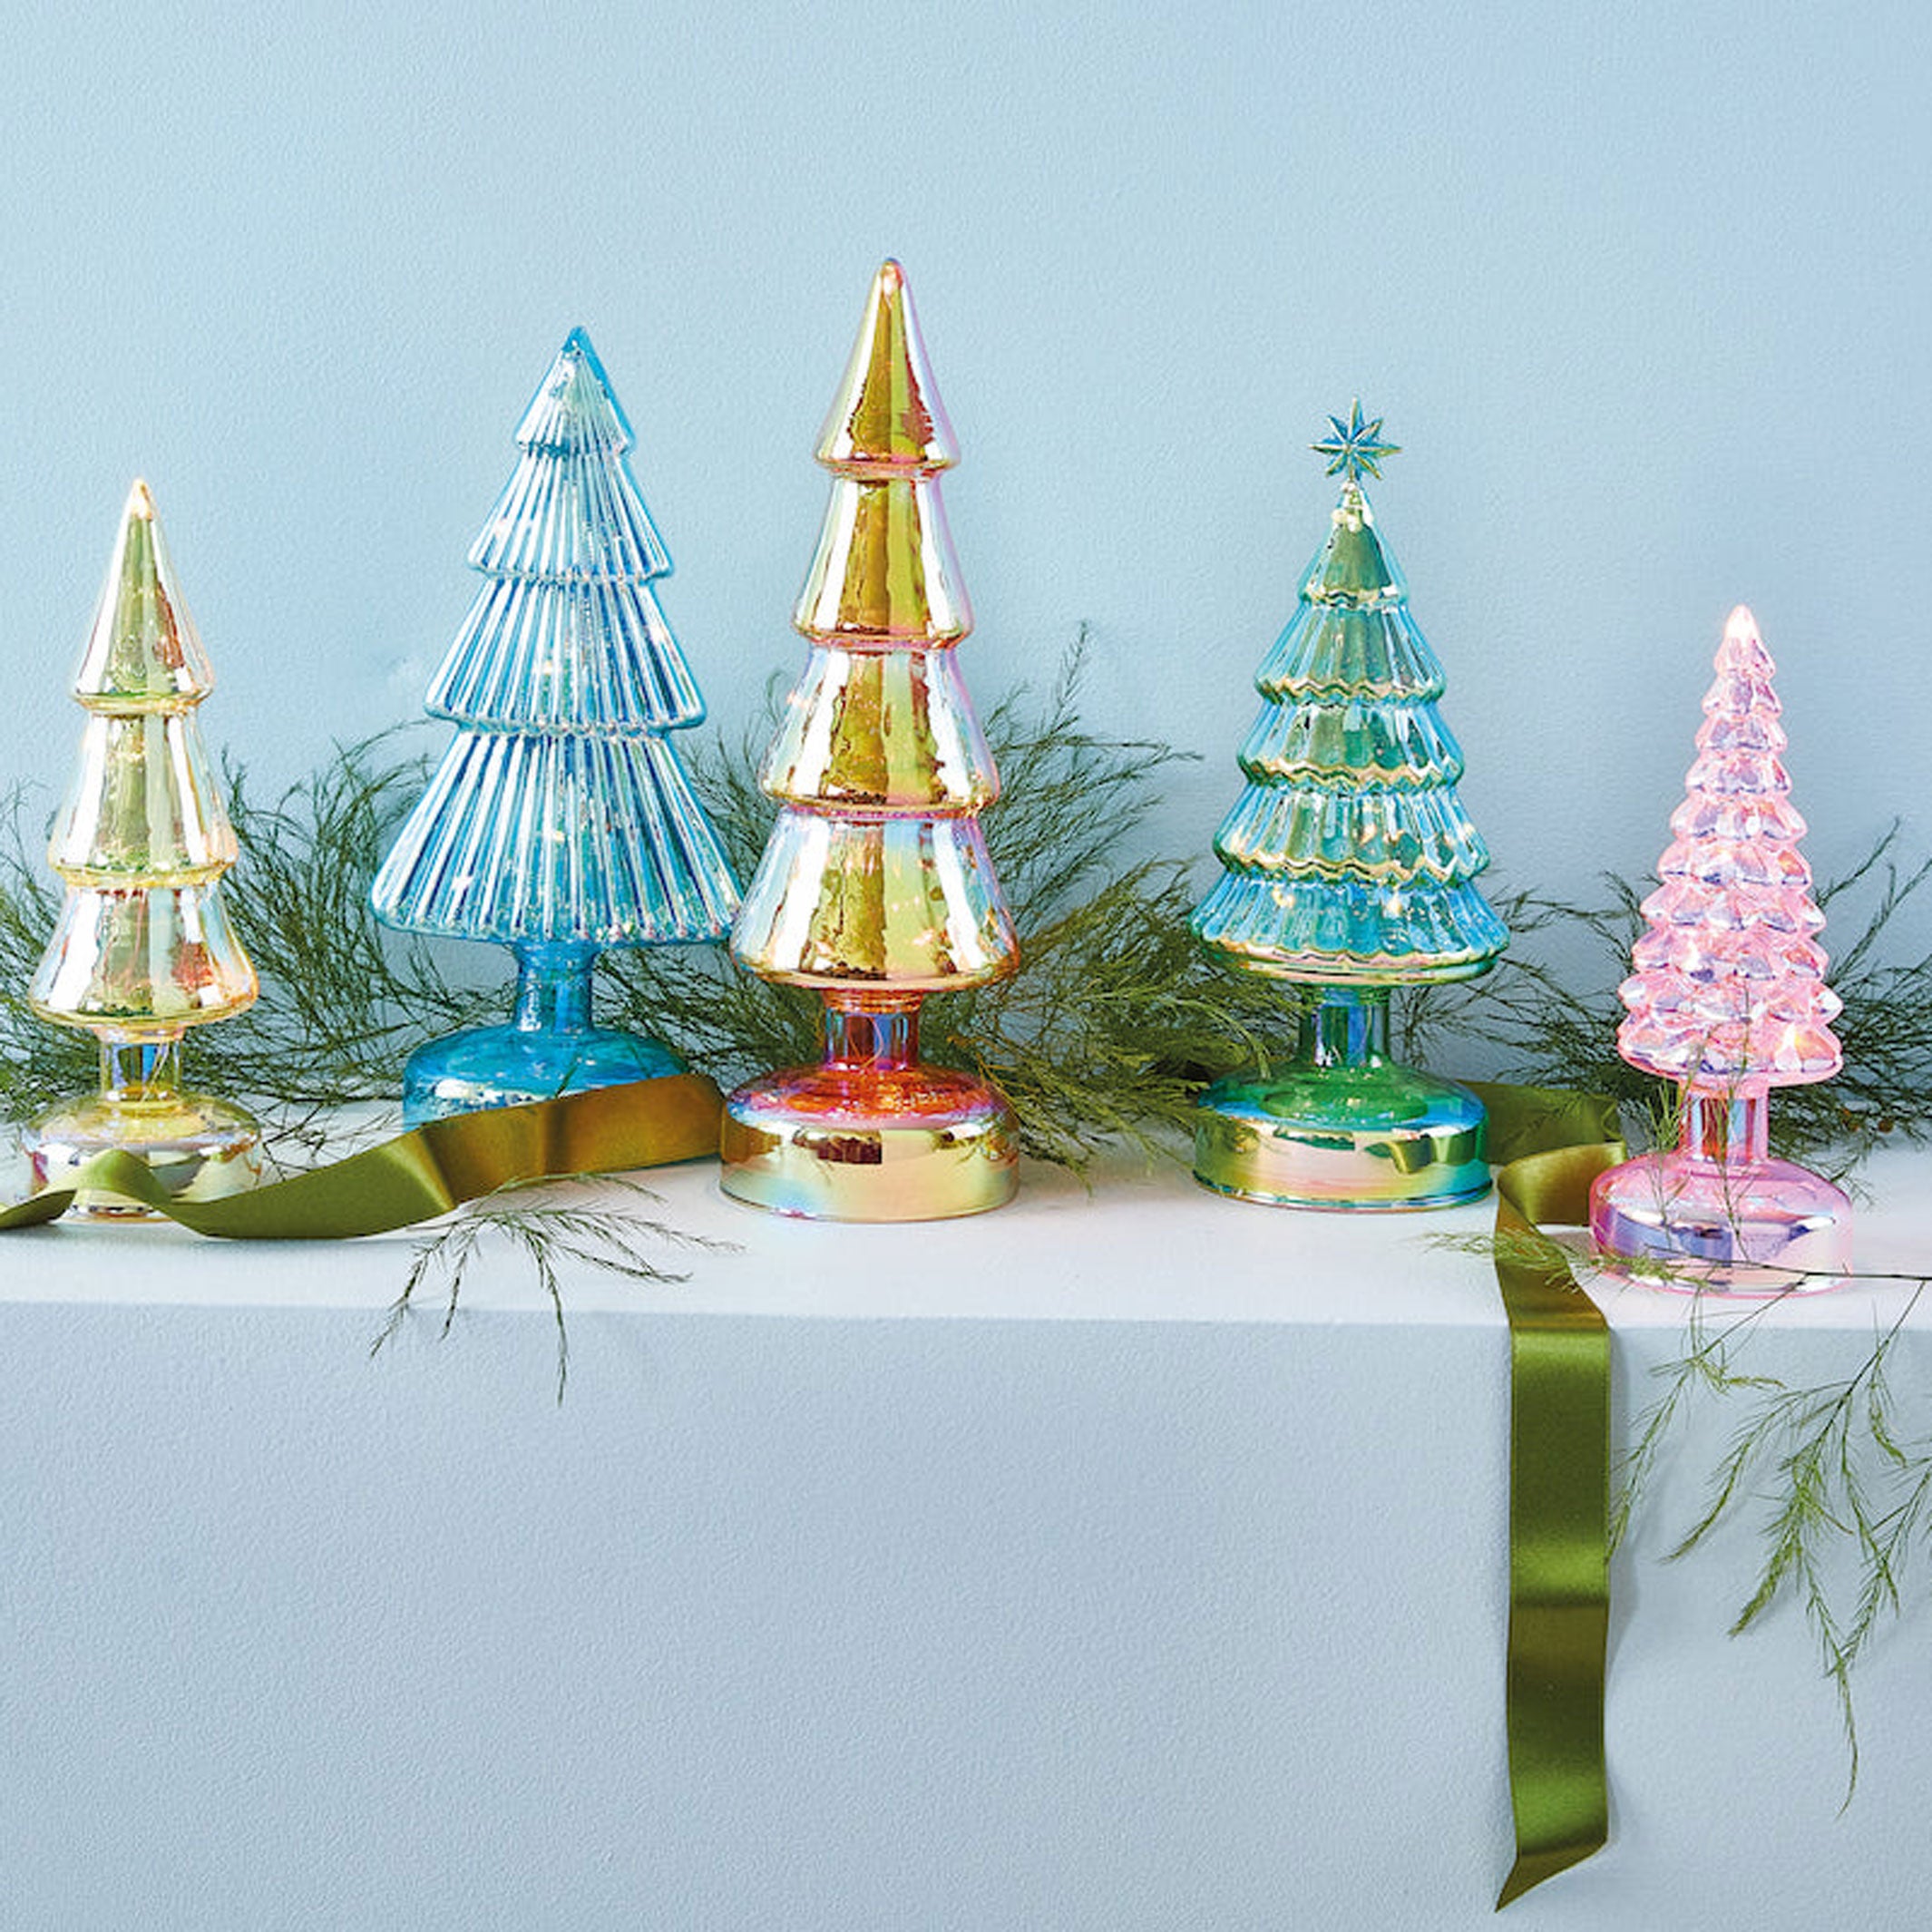 mit LED | Small GLASS Colorful LED TREES LIGHTED Bele Glas-TANNENBÄUME